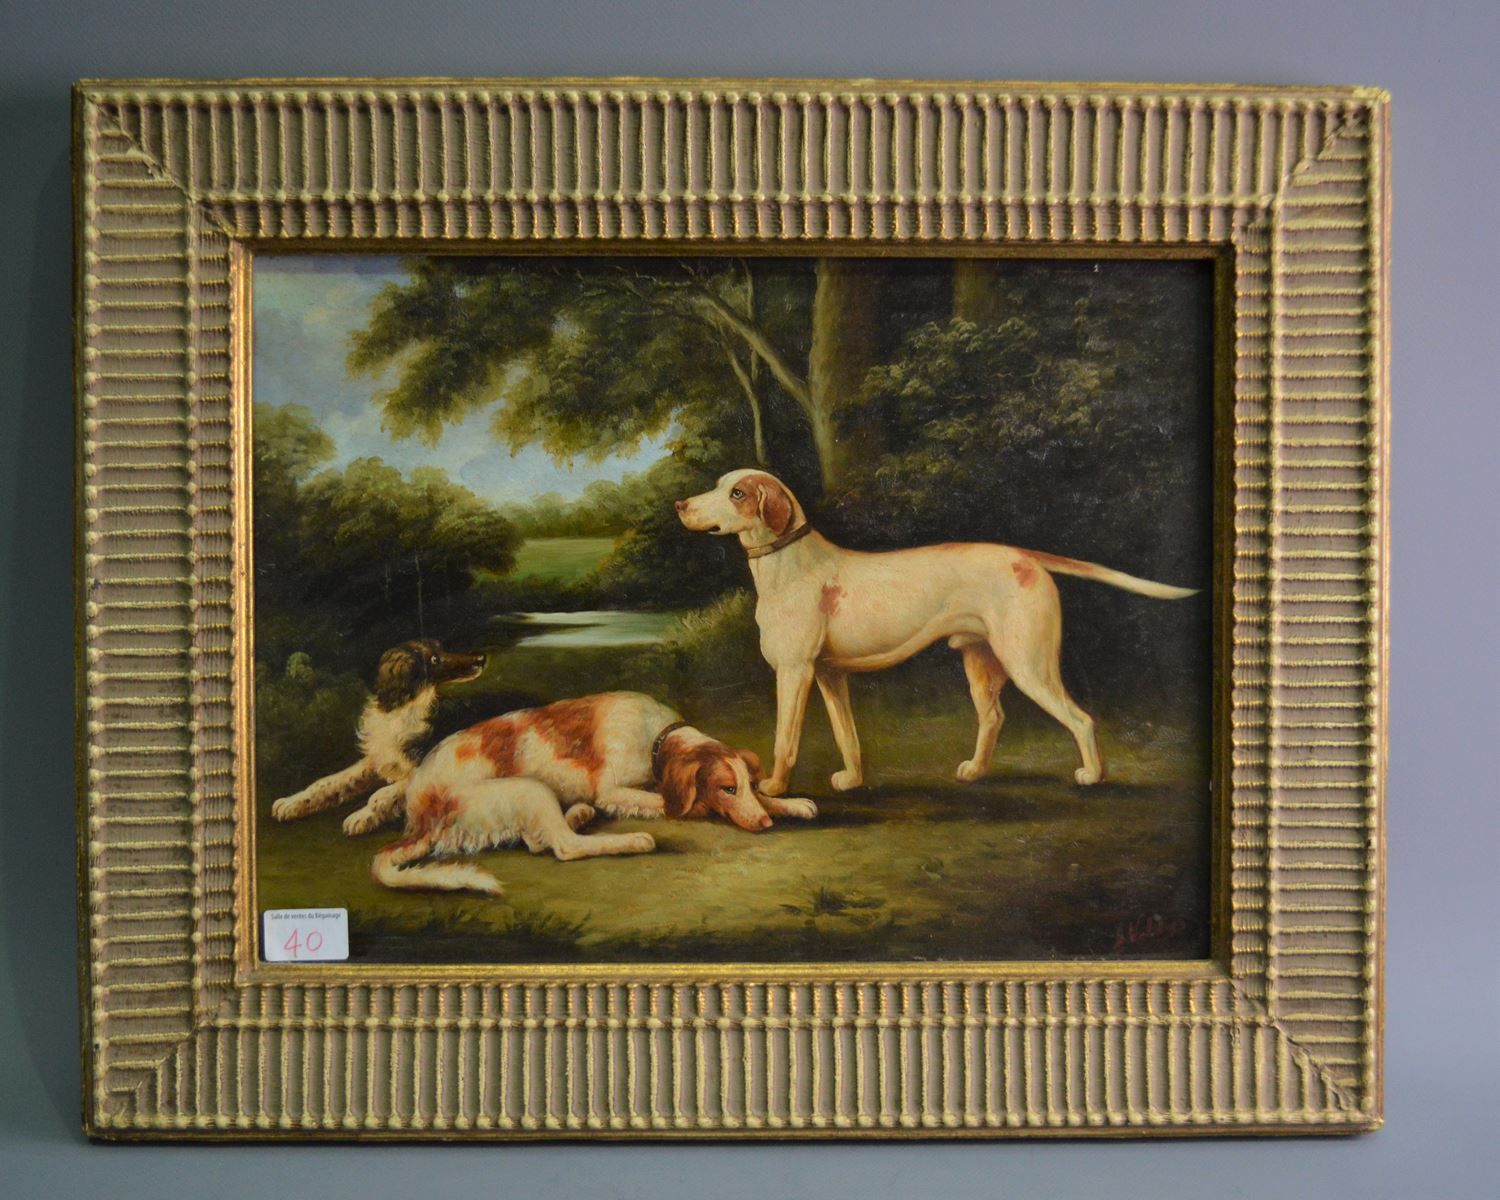 Null HSP, "The 3 dogs", signed lower right, 39x29cm